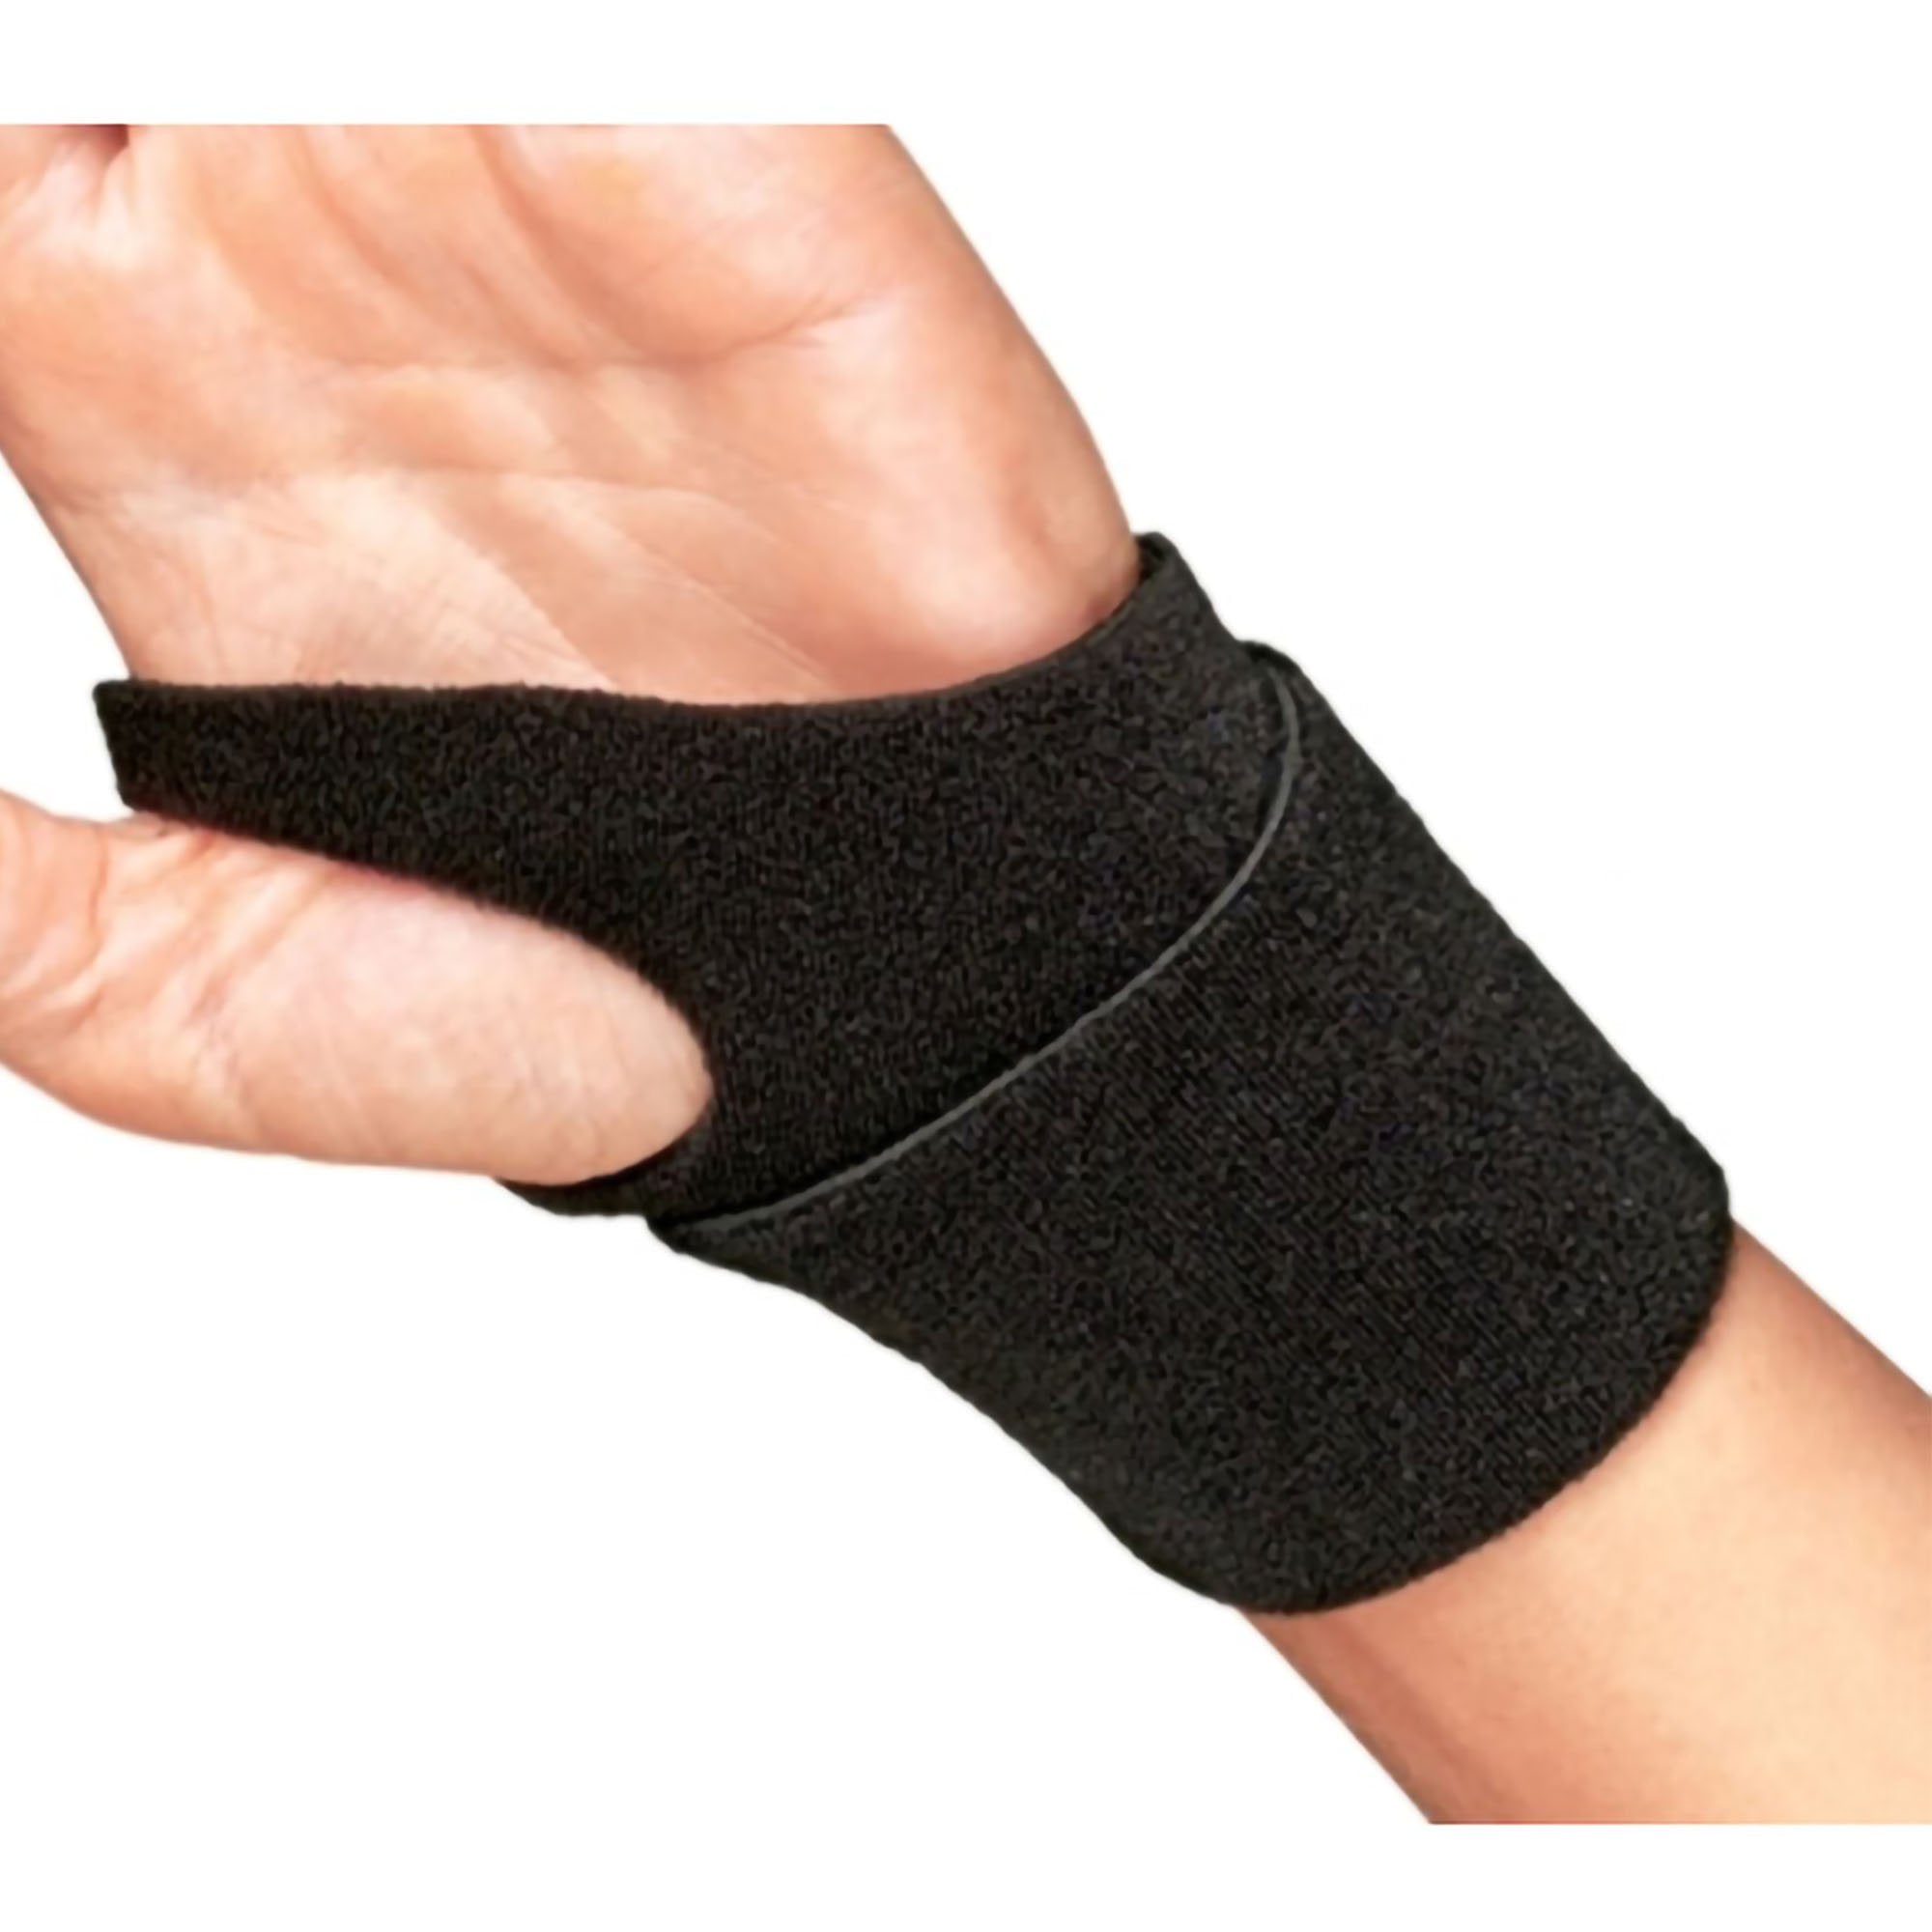 Wrist Support ProCare® Wraparound / Wristlet Neoprene Left or Right Wrist Black One Size Fits Most